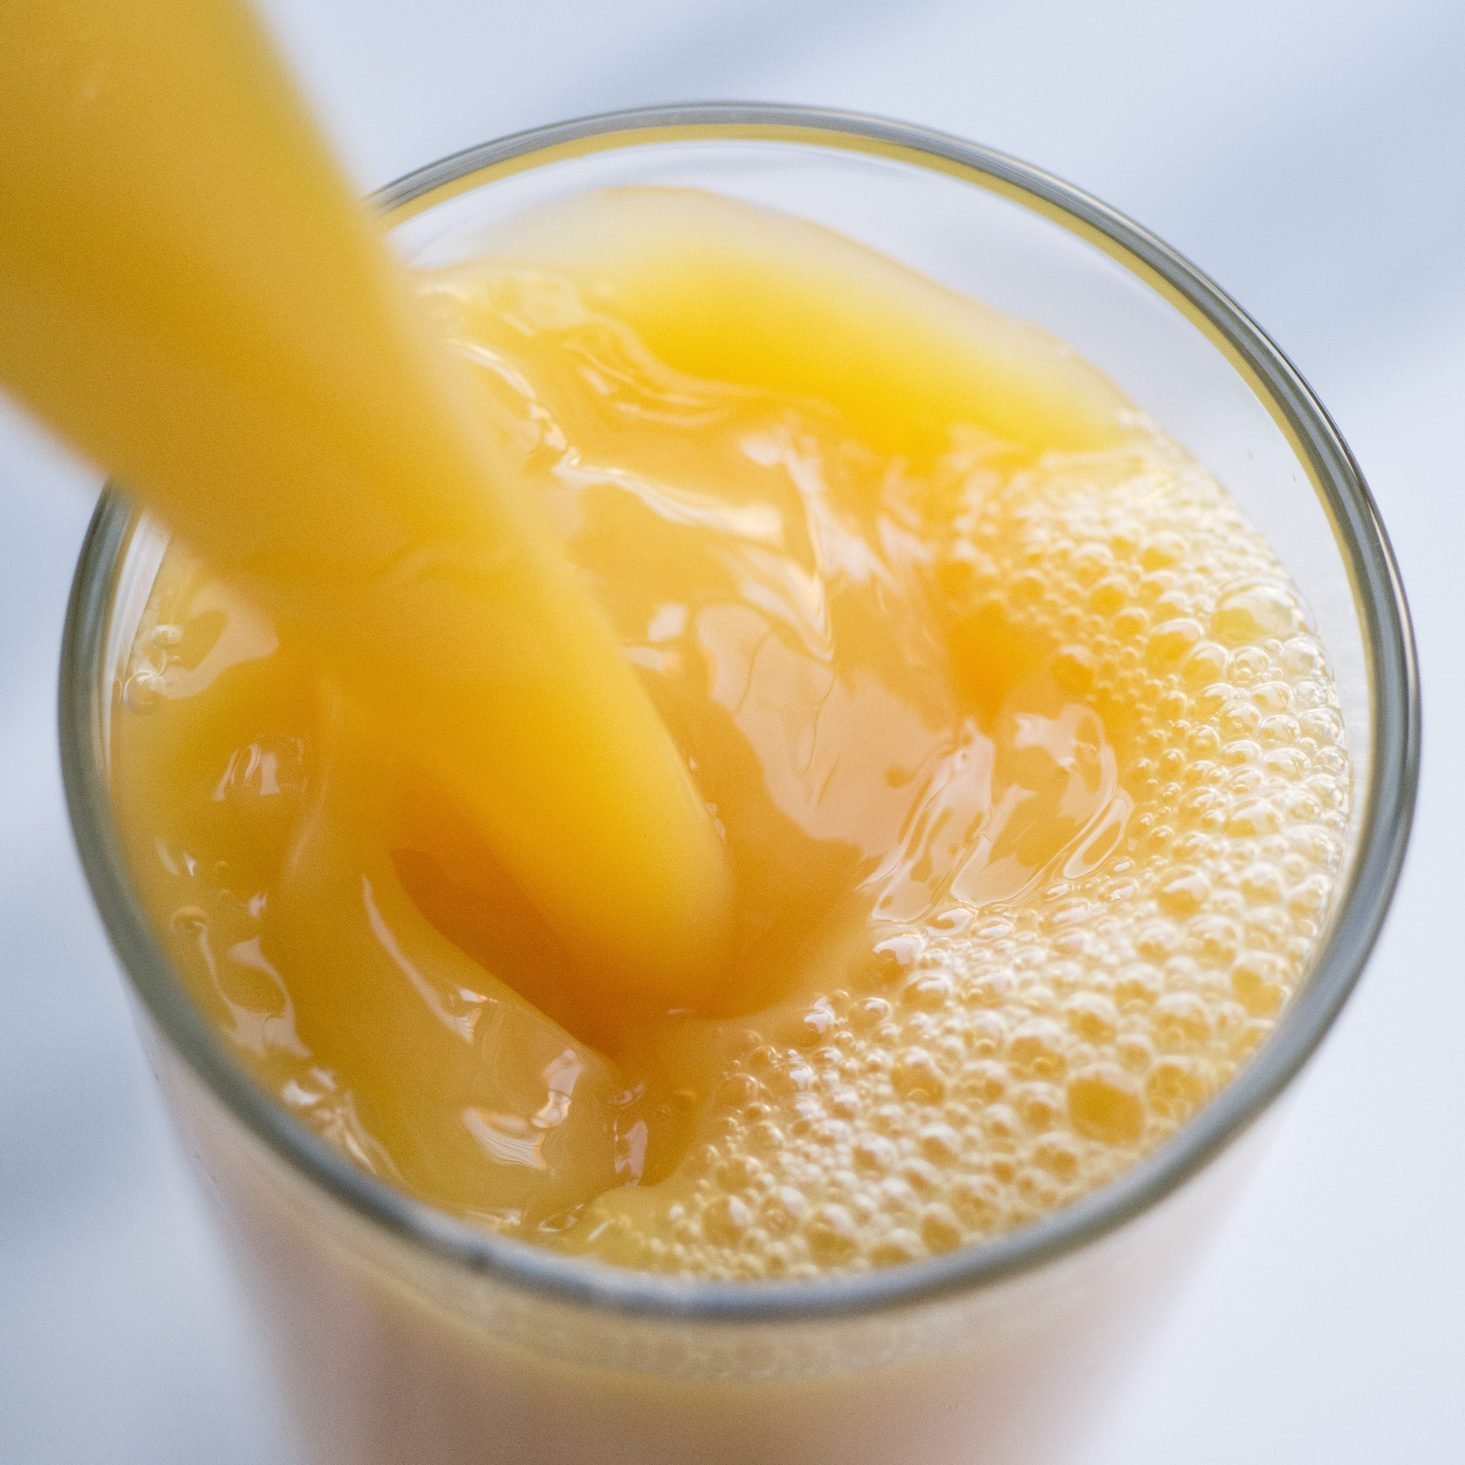 Drinking This Beloved Juice Every Day Could Reduce Your Heart Disease Risk